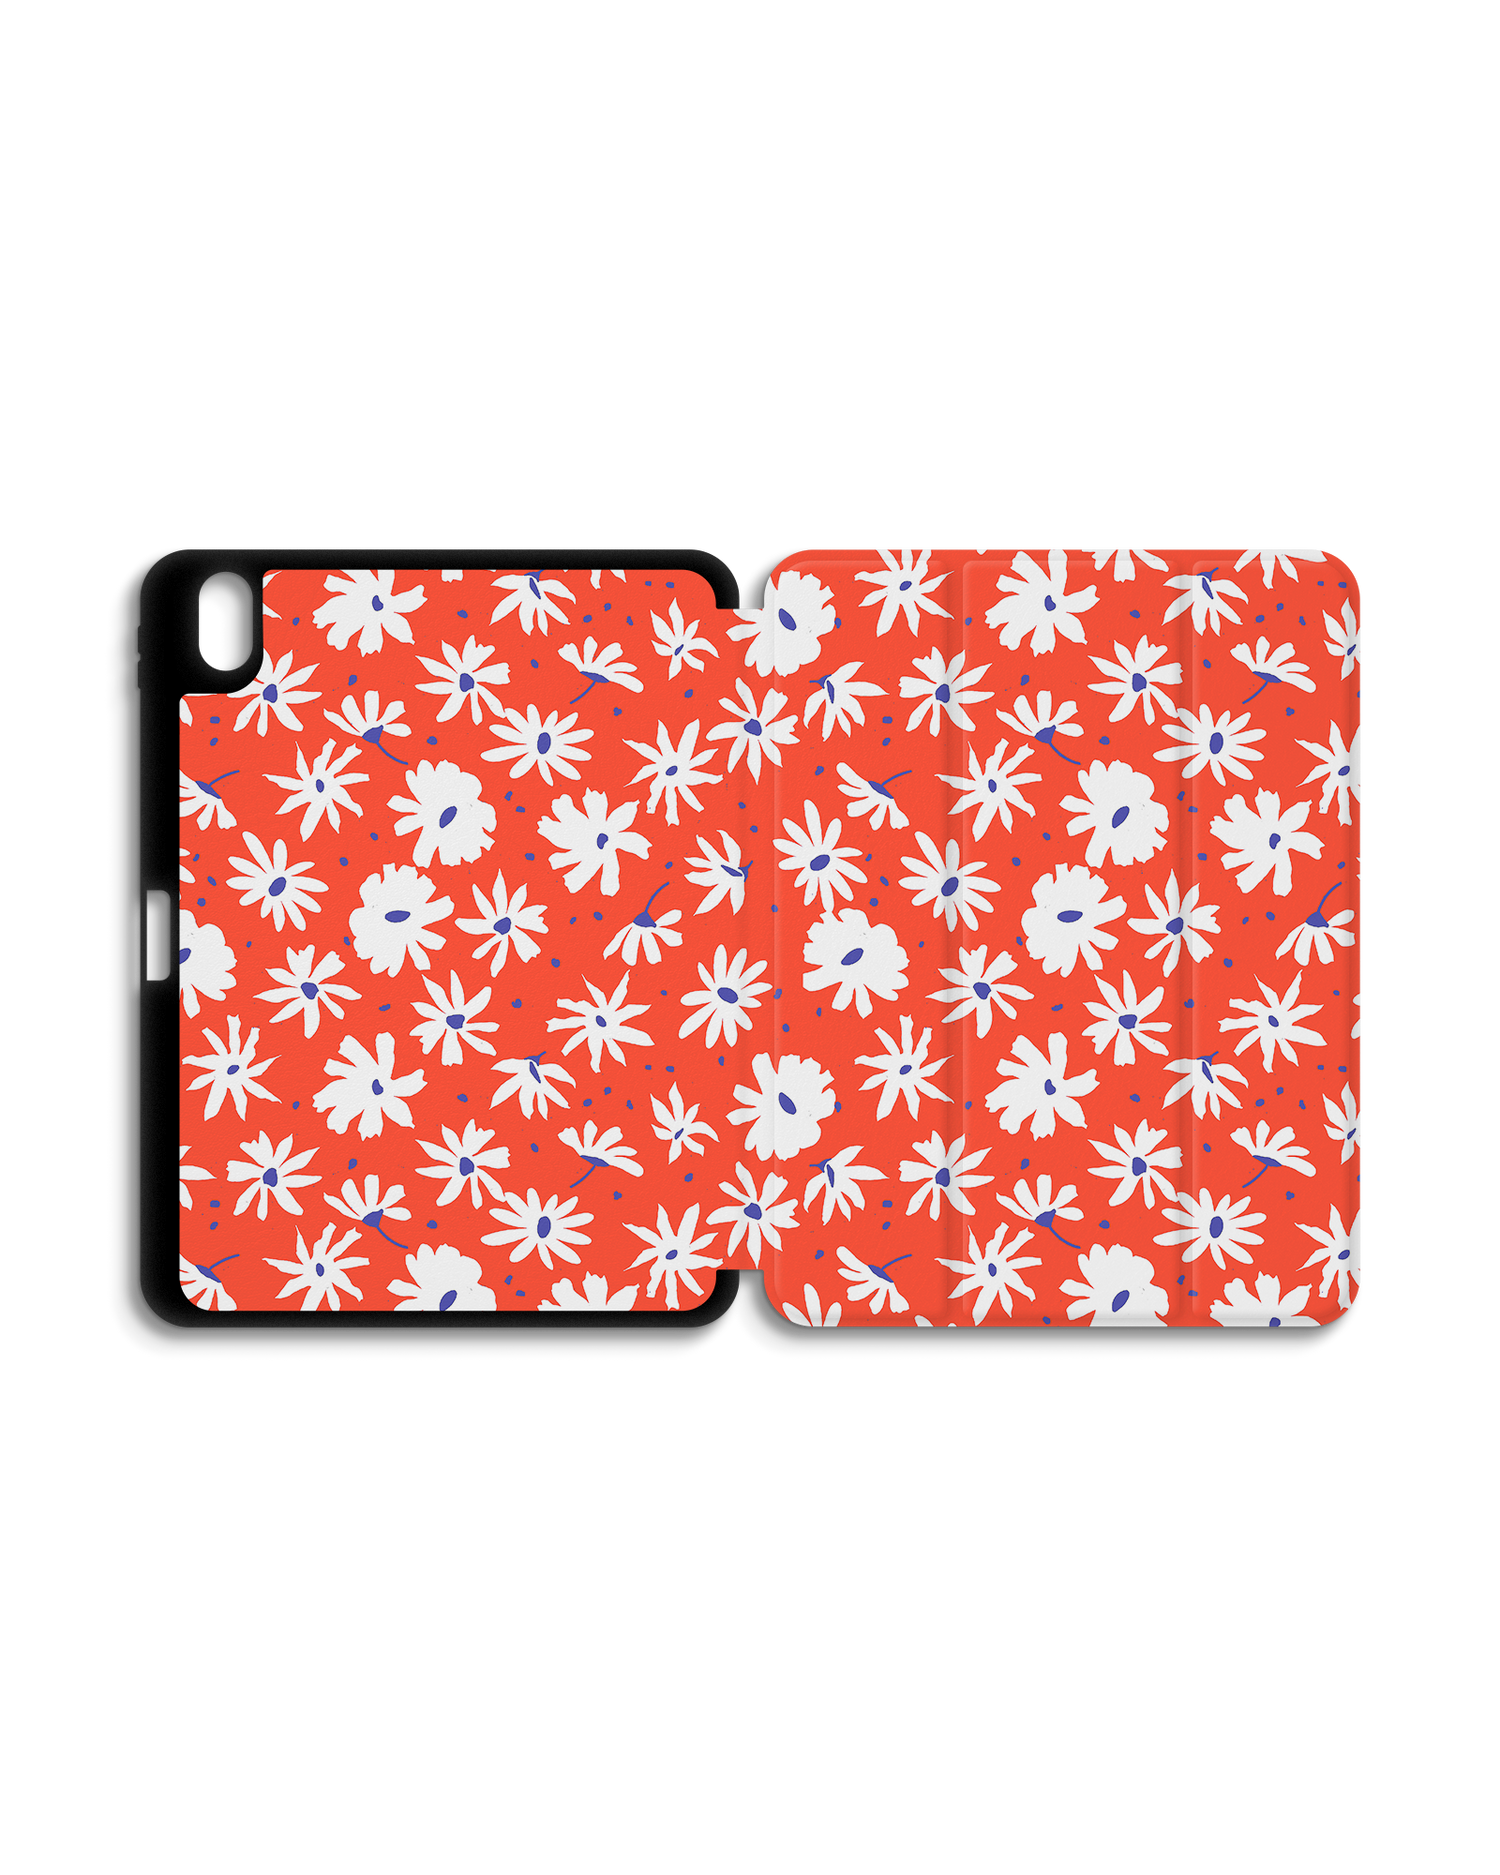 Retro Daisy iPad Case with Pencil Holder for Apple iPad (10th Generation): Opened exterior view